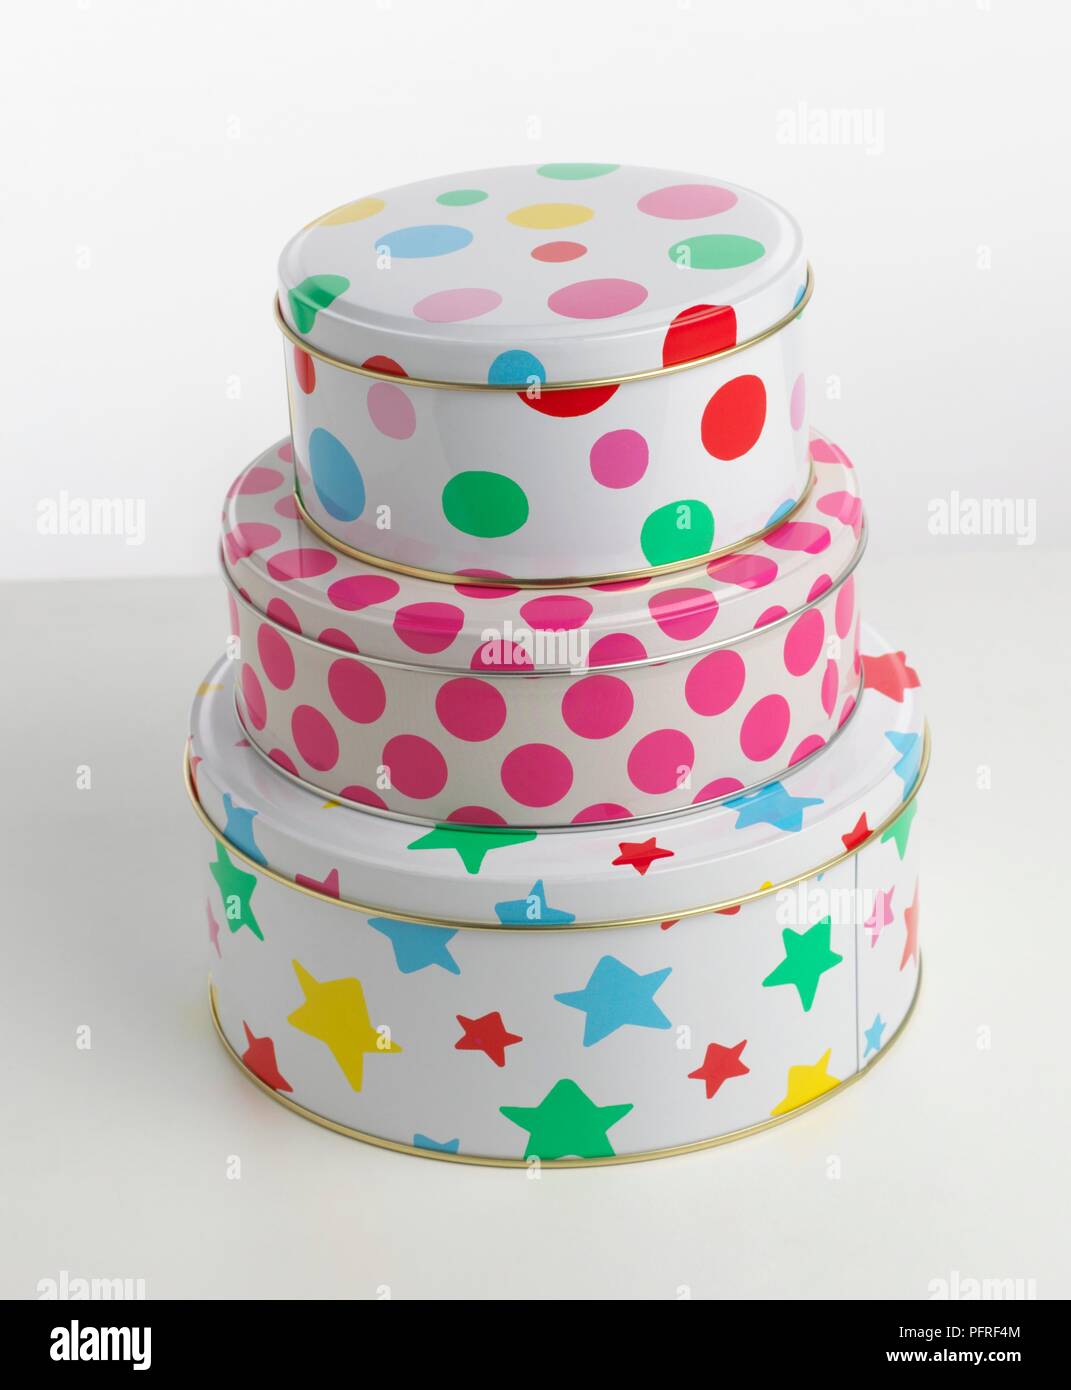 Stack of round tins decorated with stars and polka dots Stock Photo